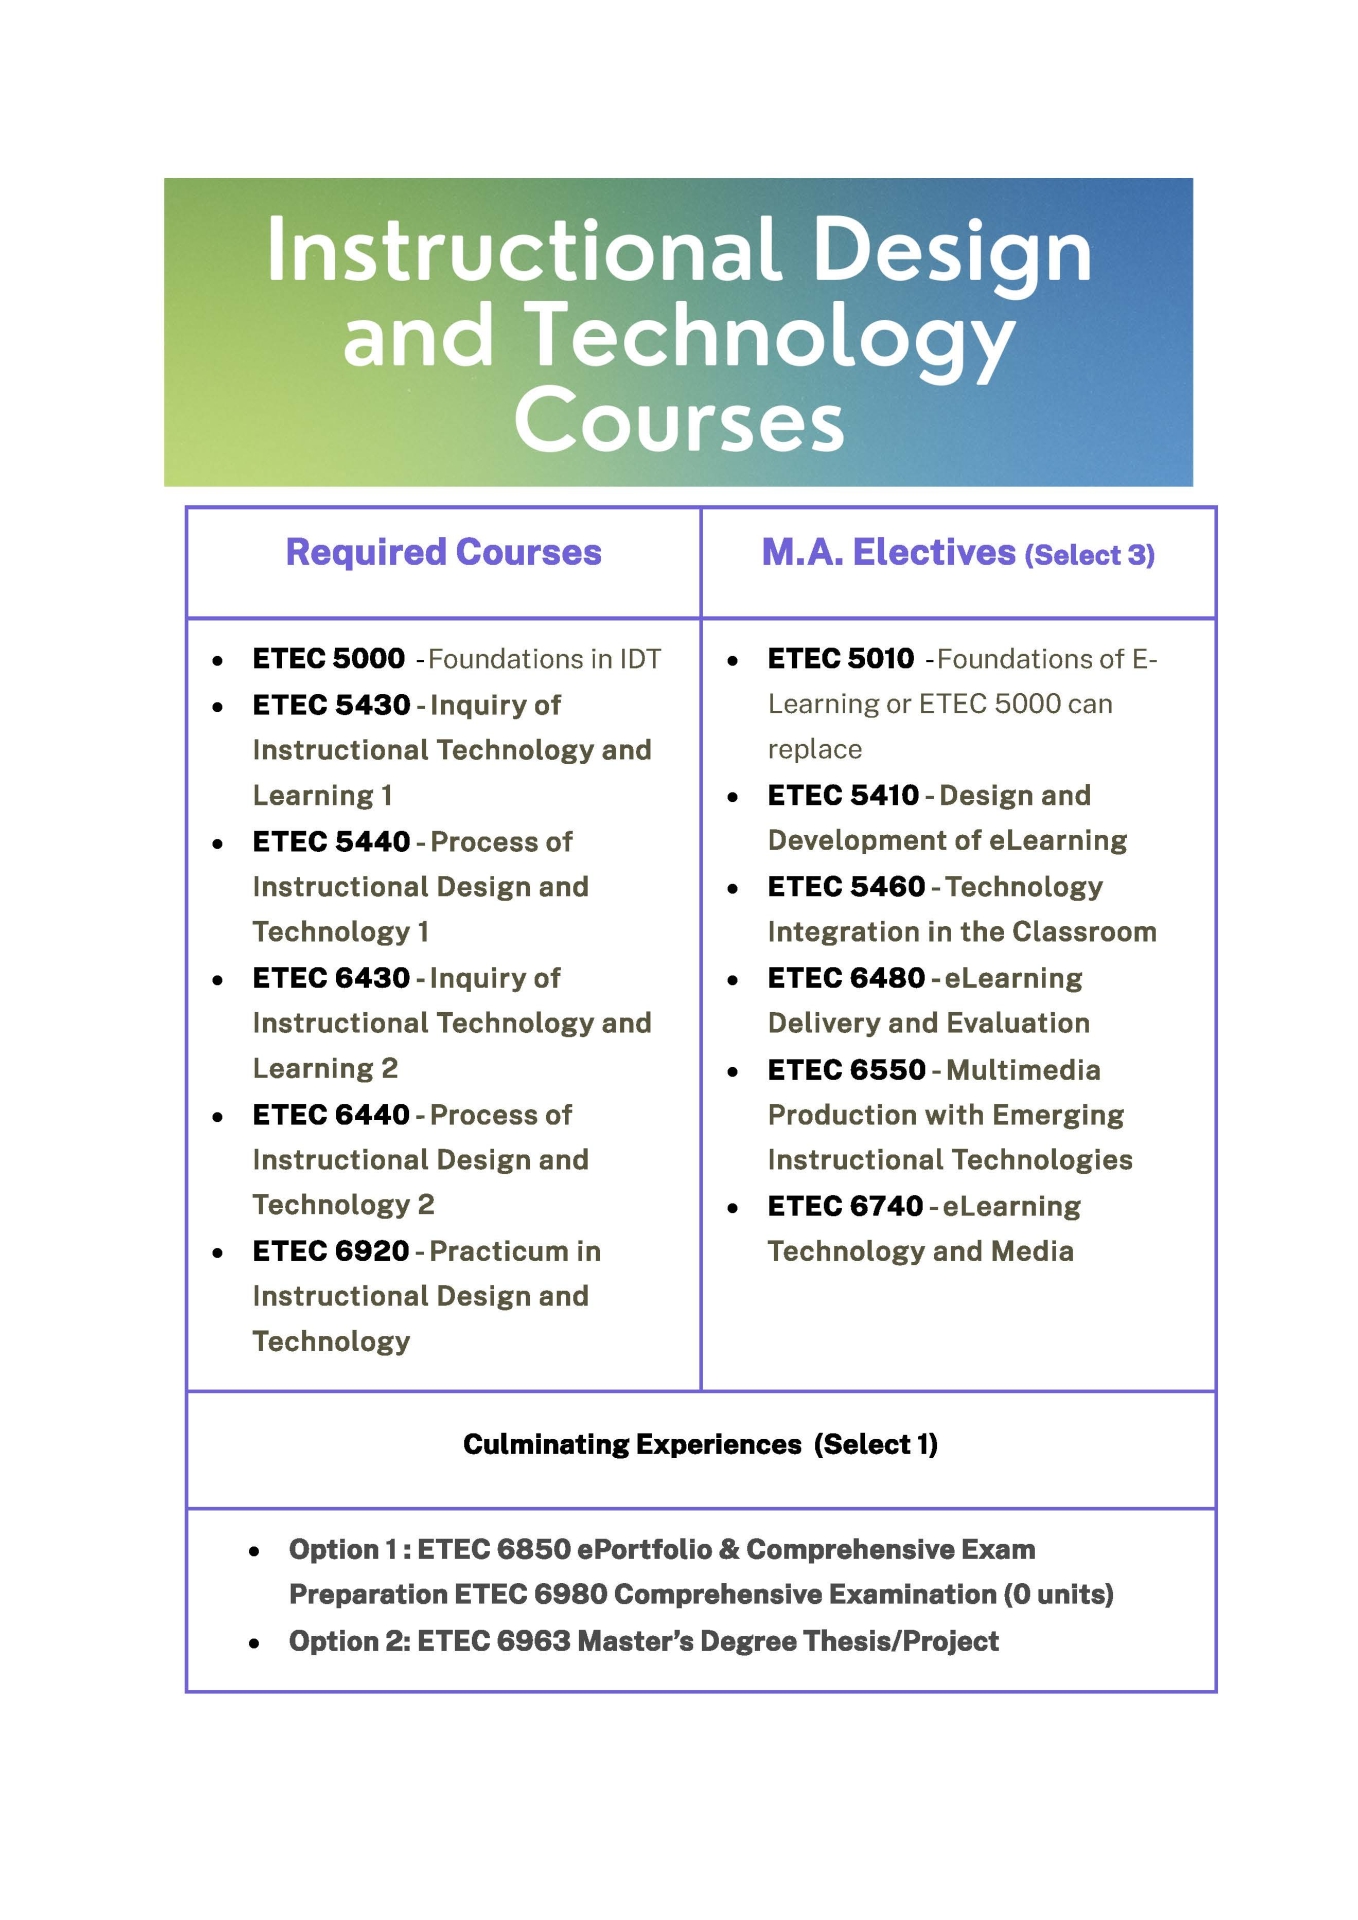 IDT Courses (Required & Electives)